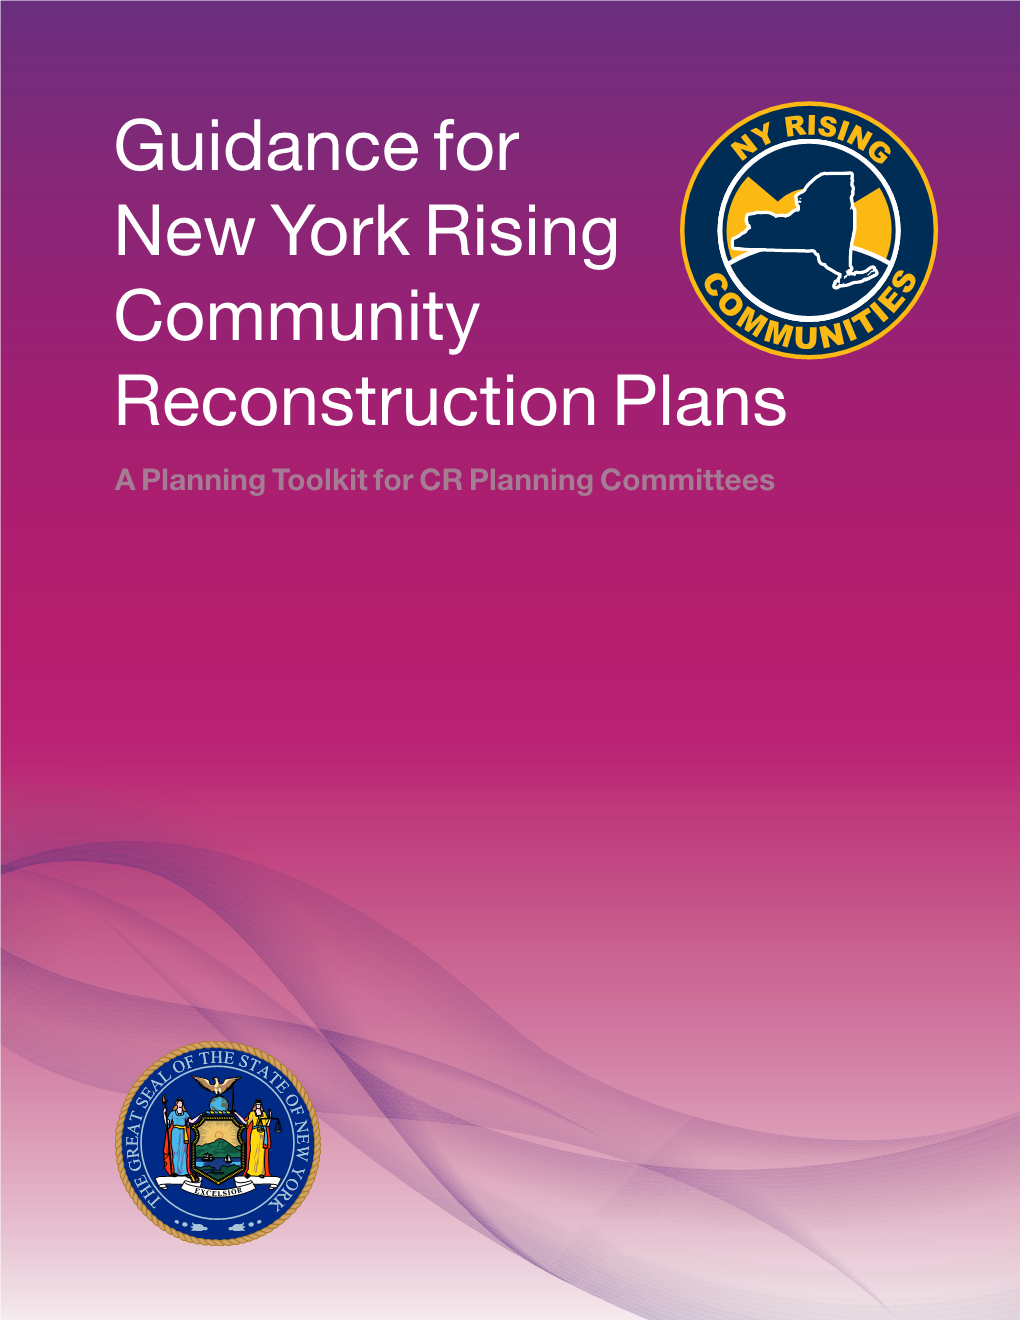 Guidance for New York Rising Community Reconstruction Plans